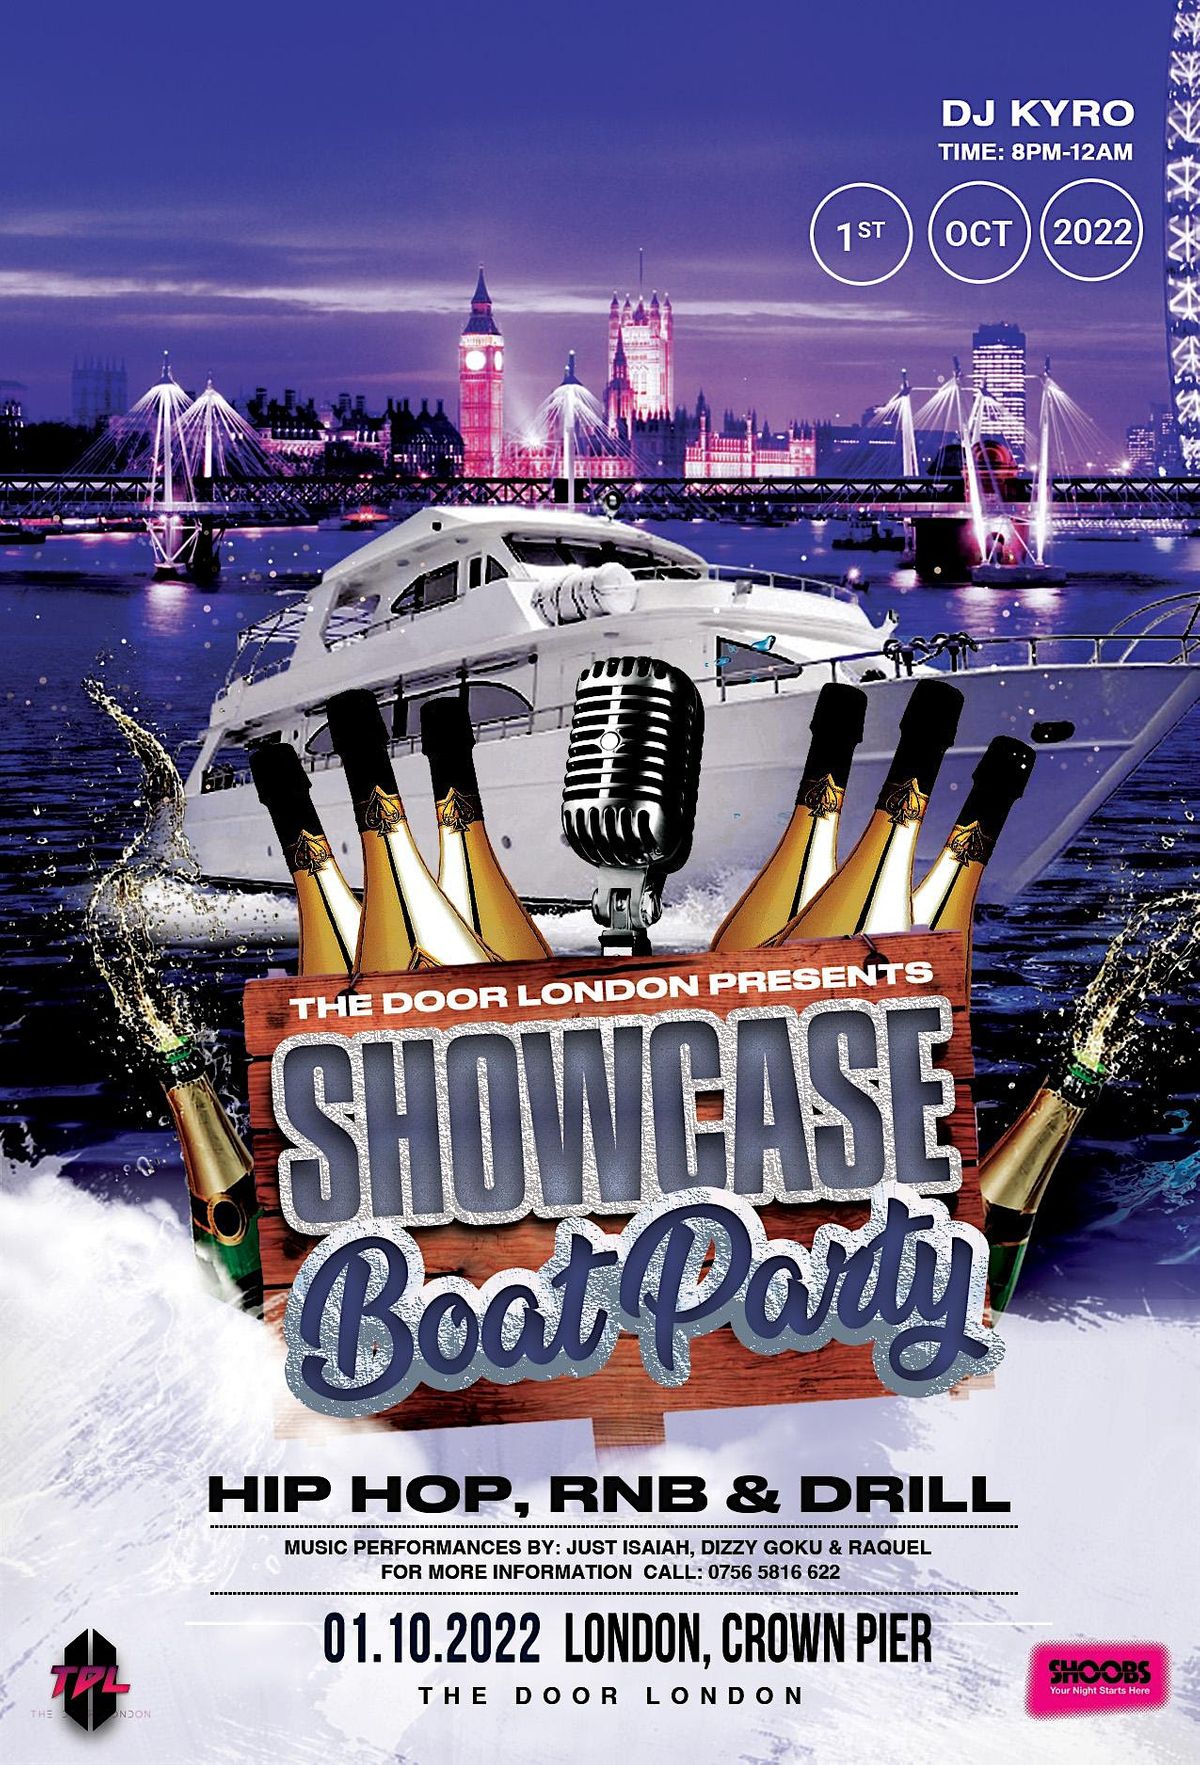 TDL Showcase x Boat party, Crown Pier, London, 1 October to 2 October